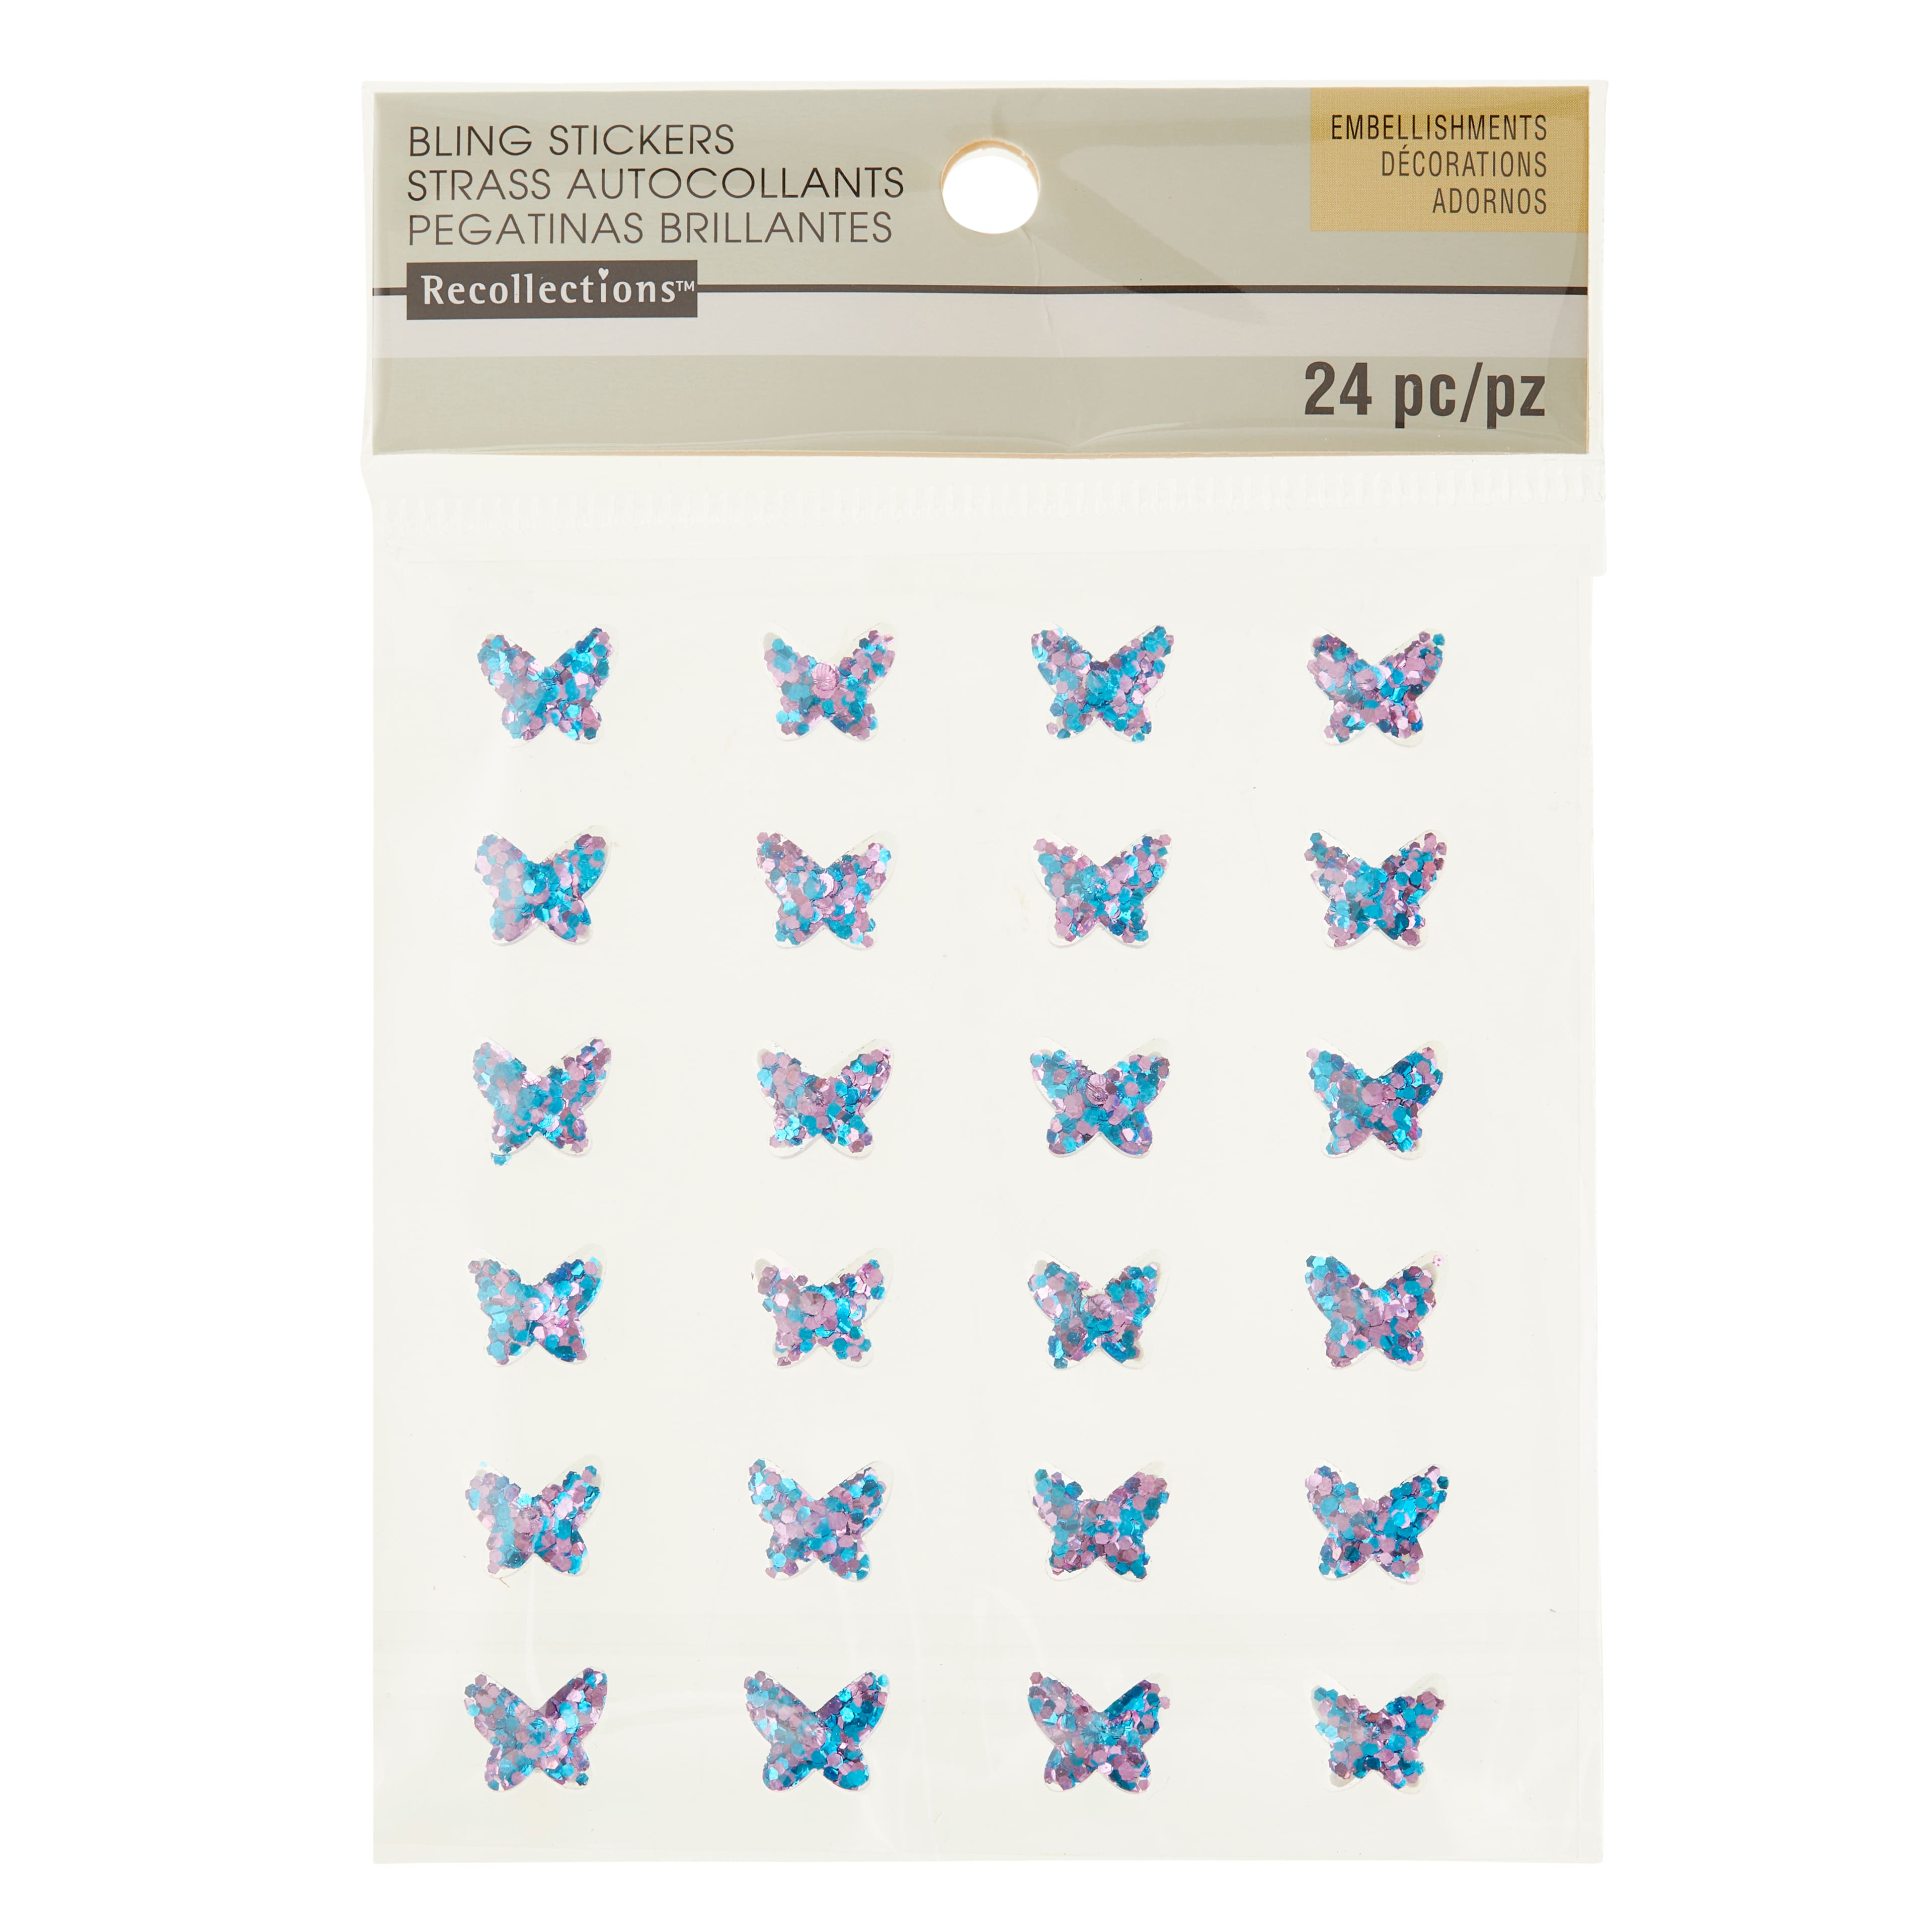 Michaels Bulk 12 Packs: 30 Ct. (360 Total) Aqua Iridescent Pinwheel Bling Stickers by Recollections, Size: 5.9 x 0.15 x 4, Blue